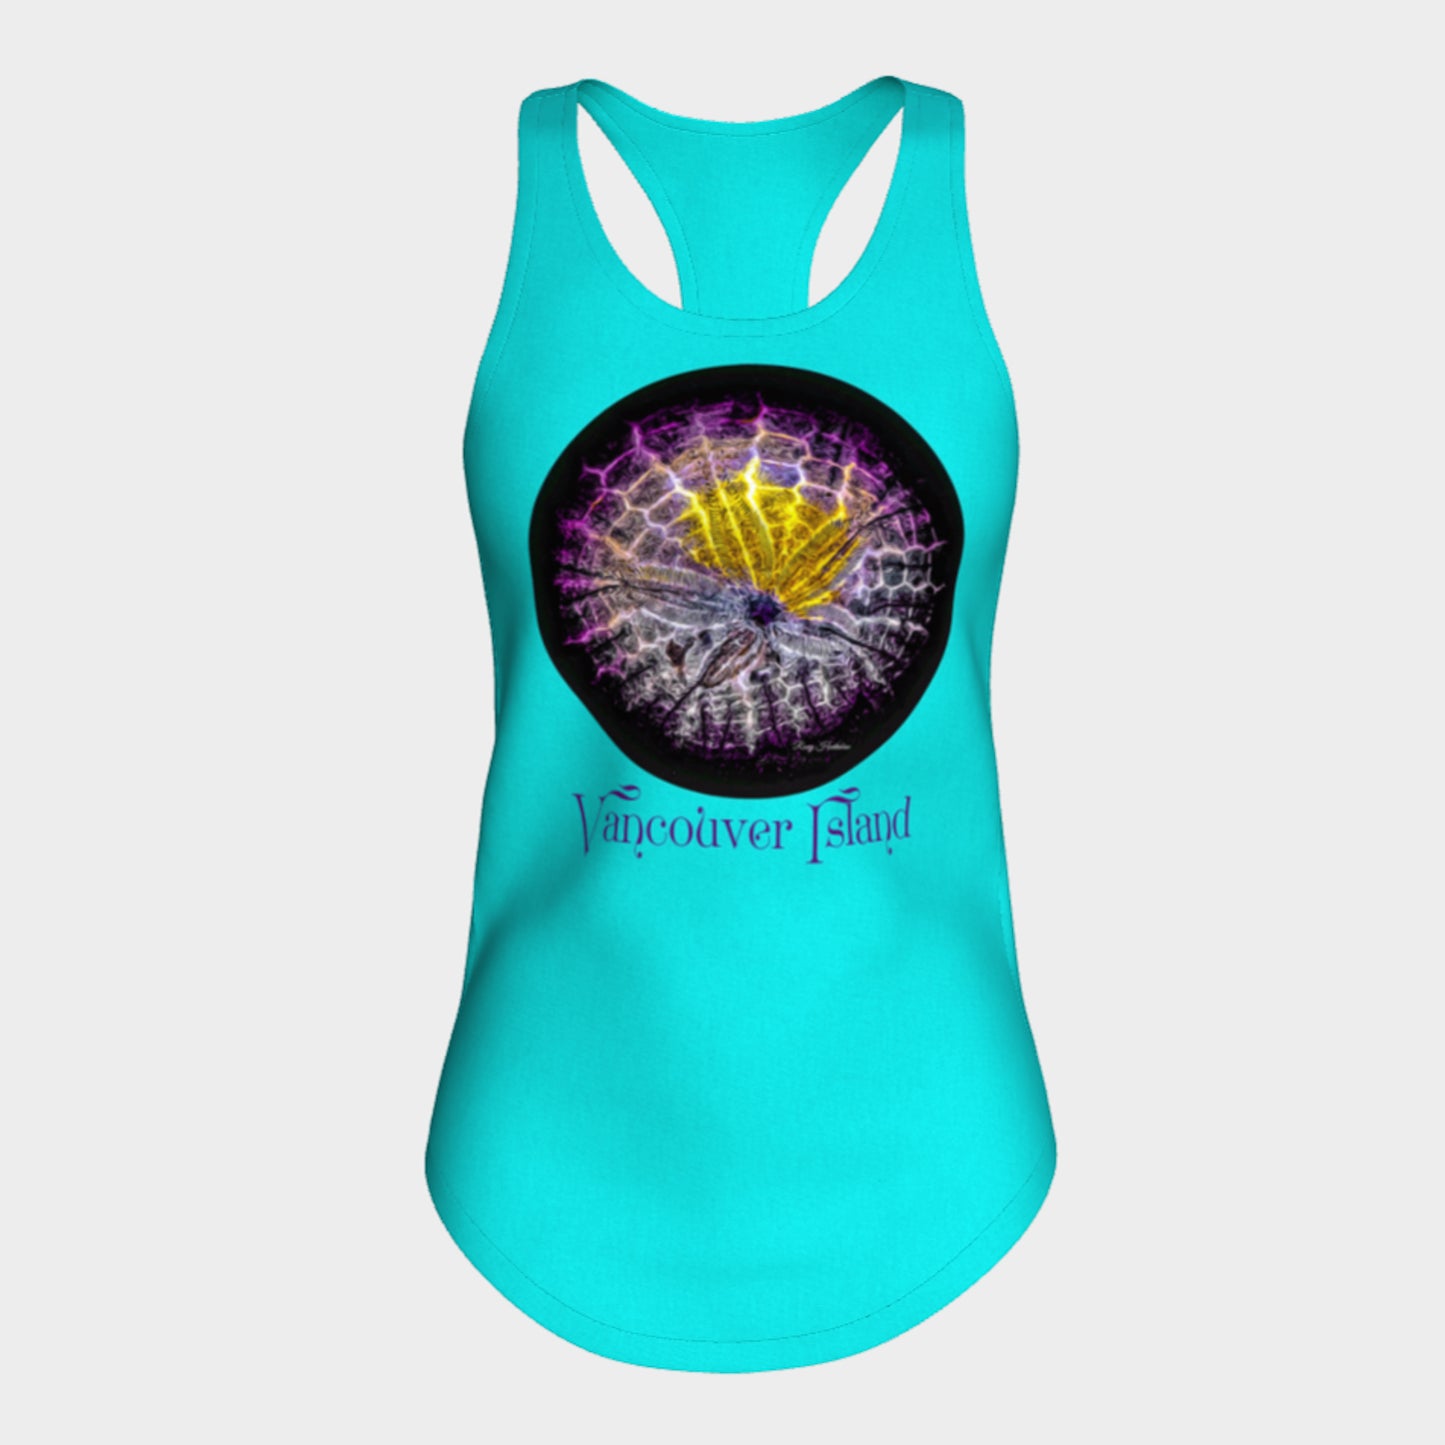 Spotlight Sand Dollar Vancouver Island Racerback Tank Top  Excellent choice for the summer or for working out.   Made from 60% spun cotton and 40% poly for a mix of comfort and performance, you get it all (including my photography and digital art) with this custom printed racerback tank top.   Van Isle Goddess Next Level racerback tank top will quickly become you go-to tank top because of the super comfy fit!